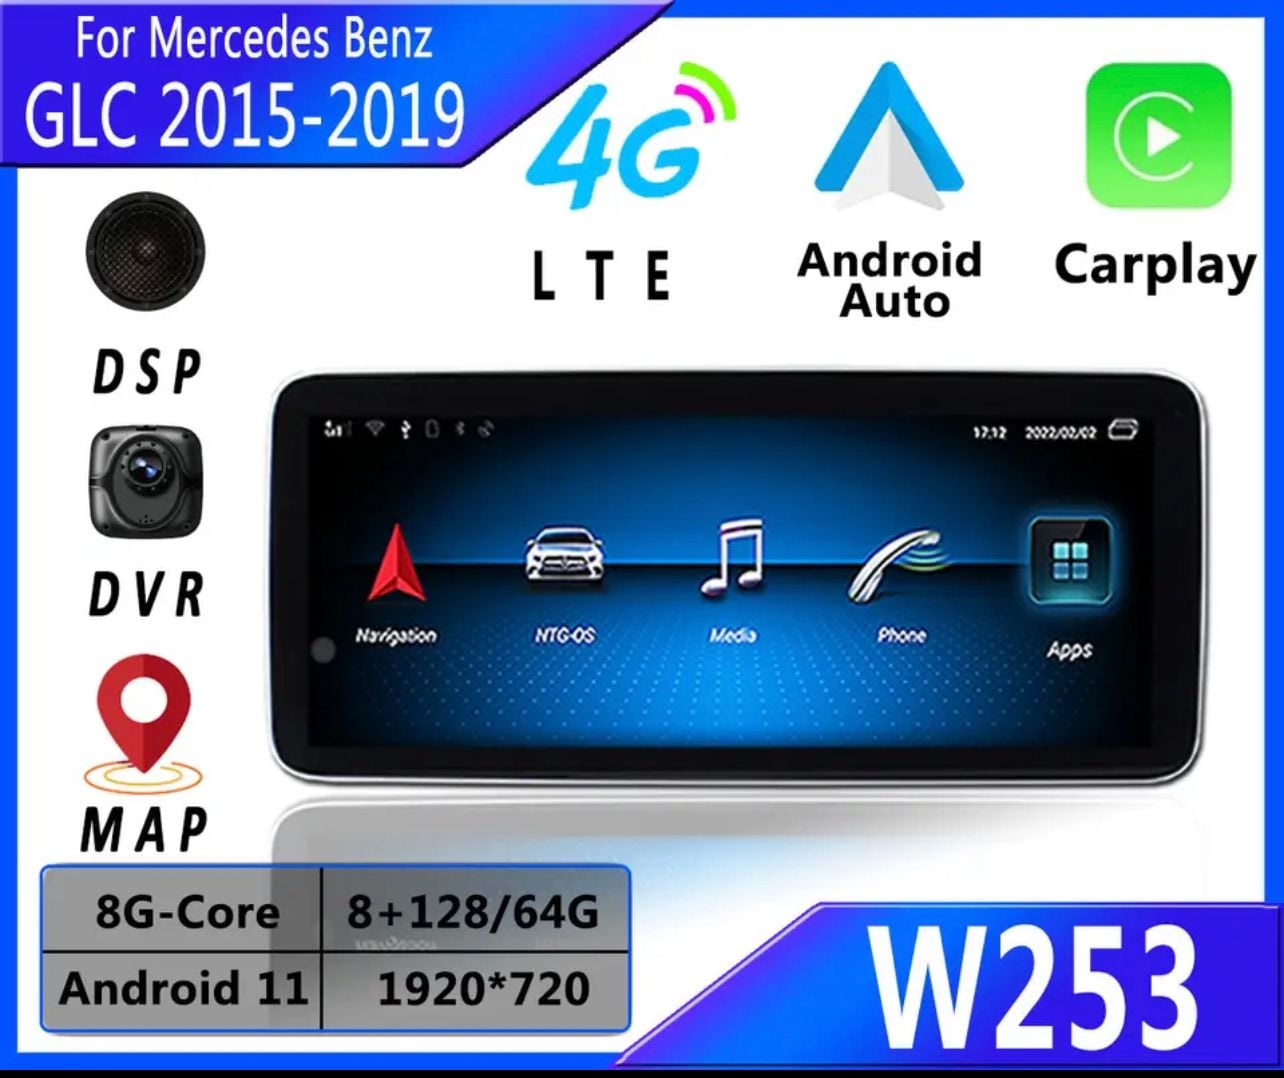 Audio Video/Electronics - GLC W253 2015-2019 Android11 Carplay GPS Navigation Multimedia Player - Used - 2015 to 2019 Mercedes-Benz GLC300 - Limerick, PA 19468, United States